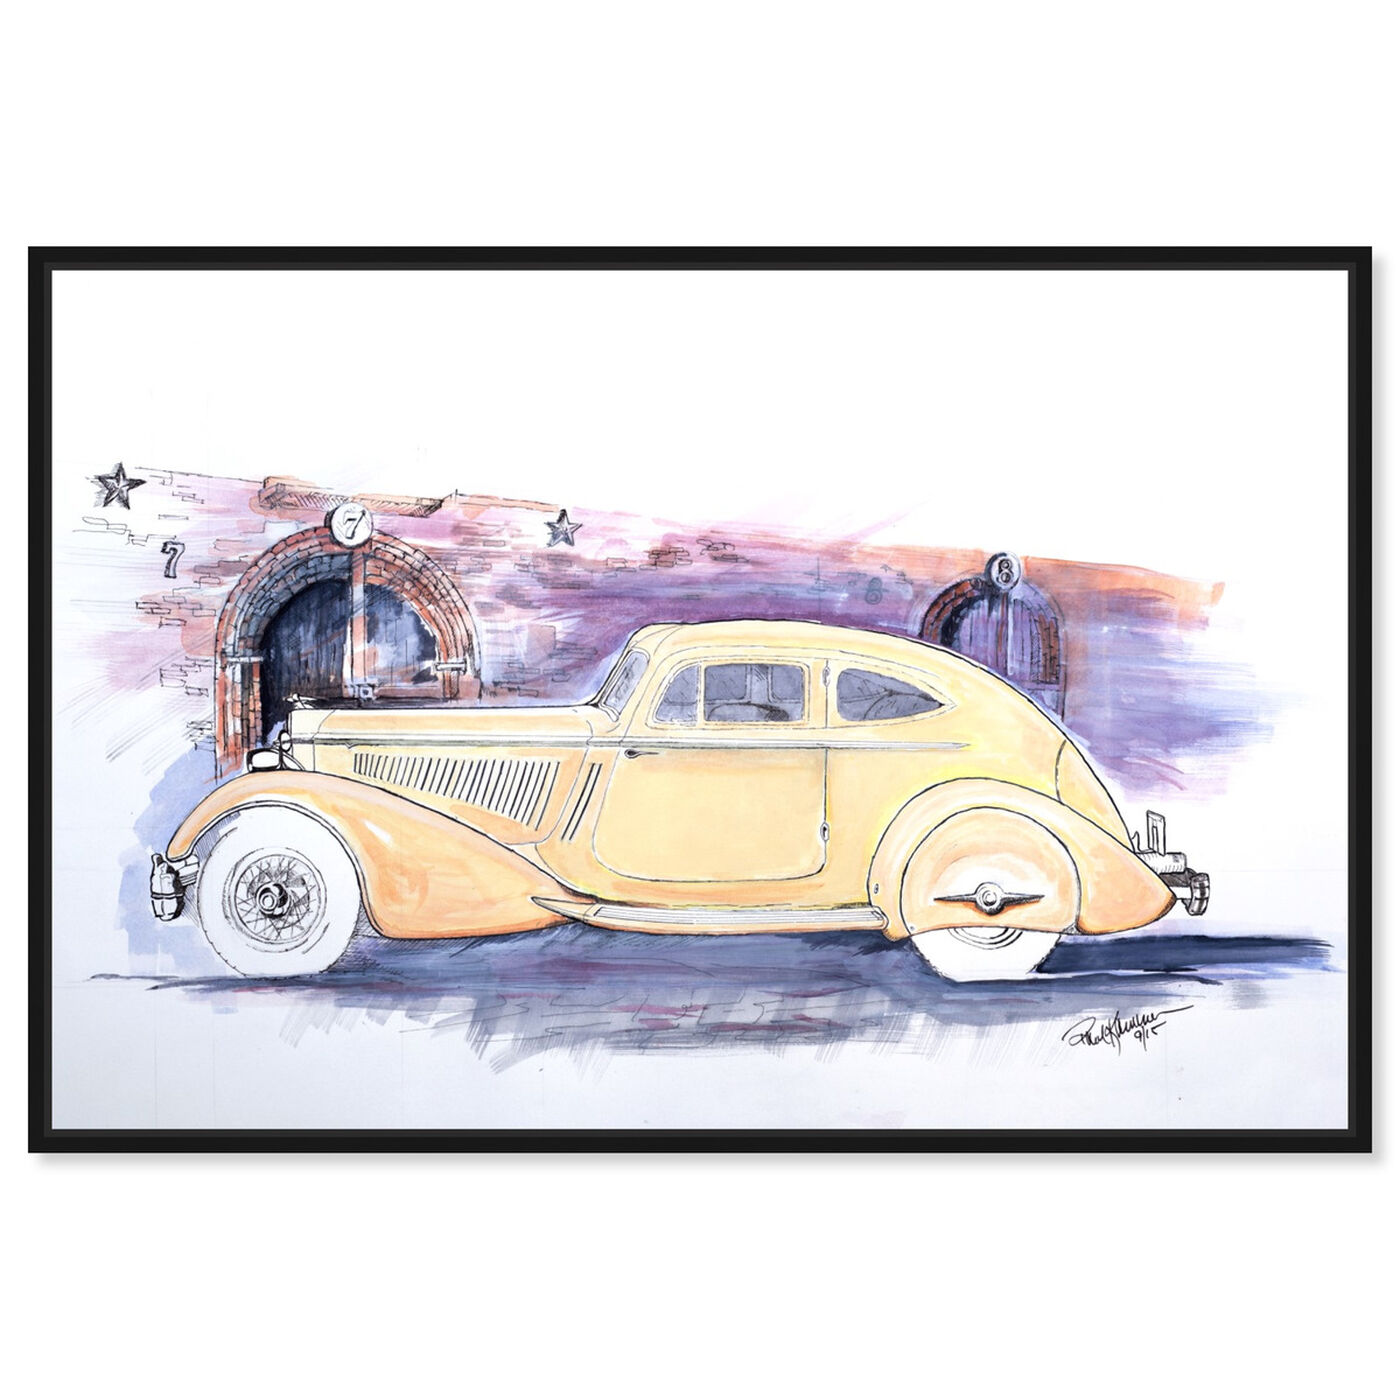 Front view of Paul Kaminer - 1934 Packard V-12 Sport Coupe featuring transportation and automobiles art.